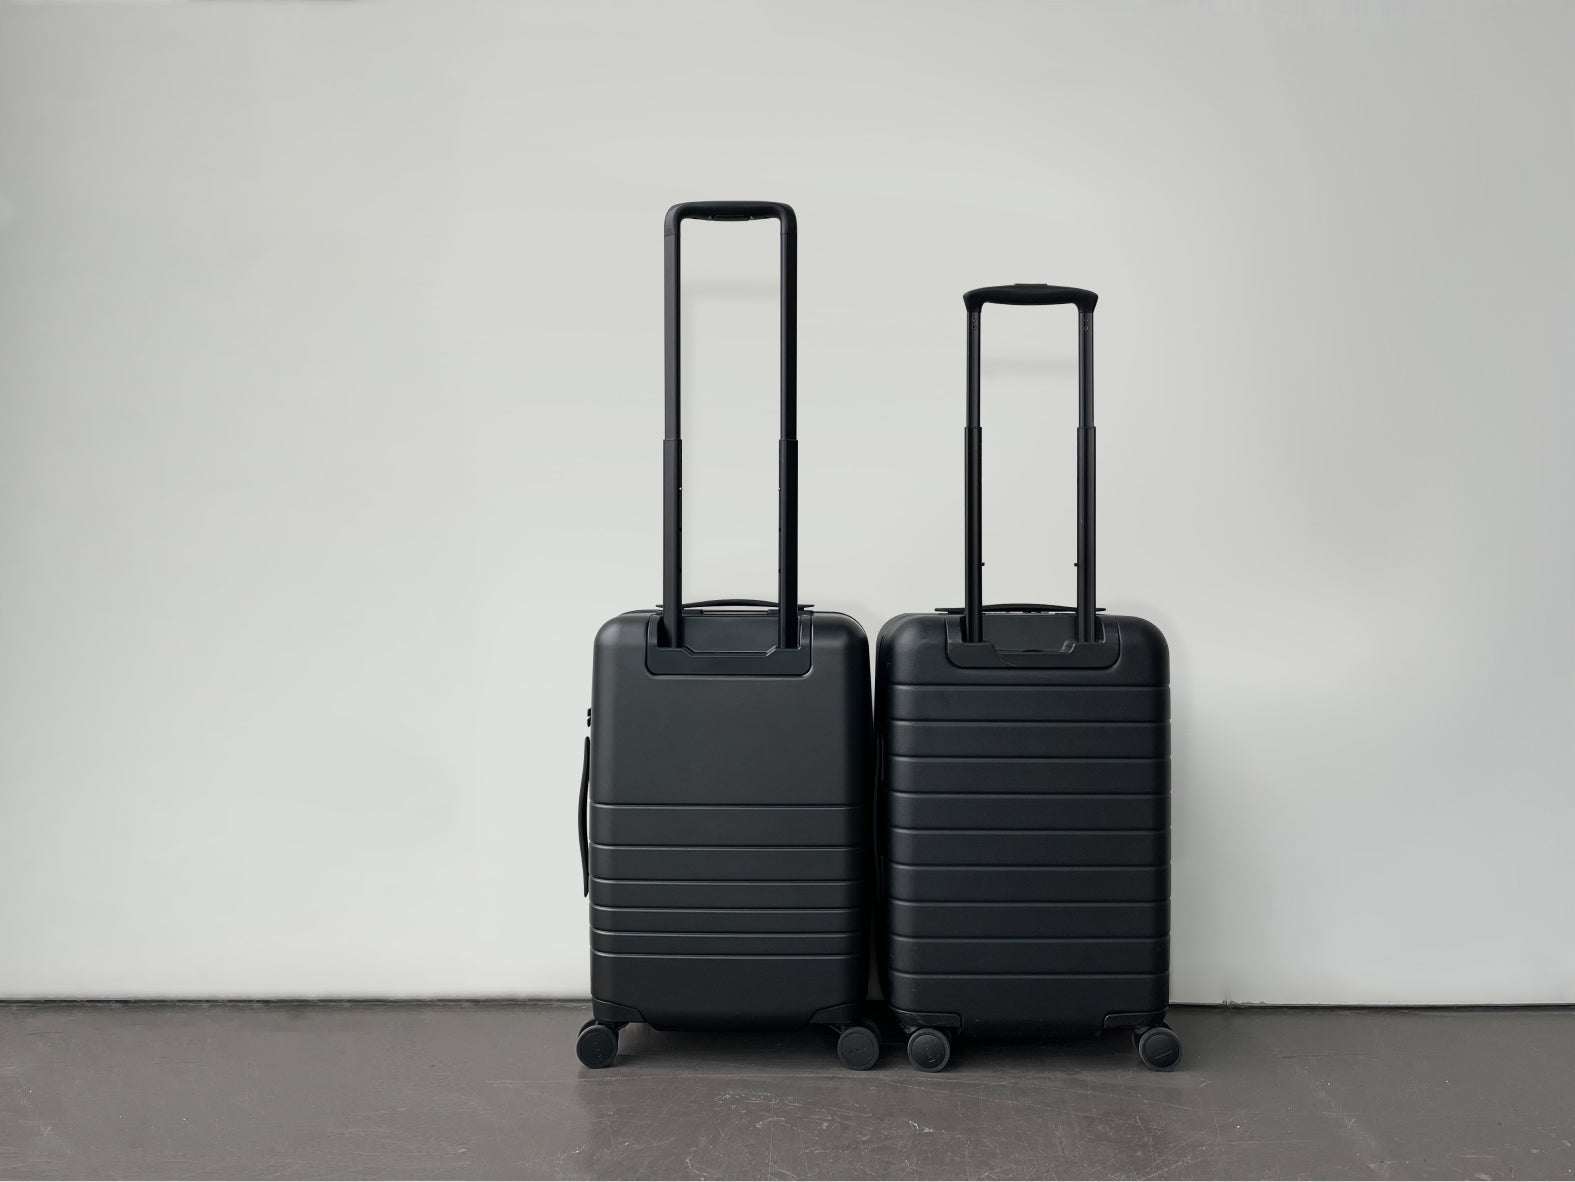 Away vs. Monos: Which Brand Makes the Better Carry-On?